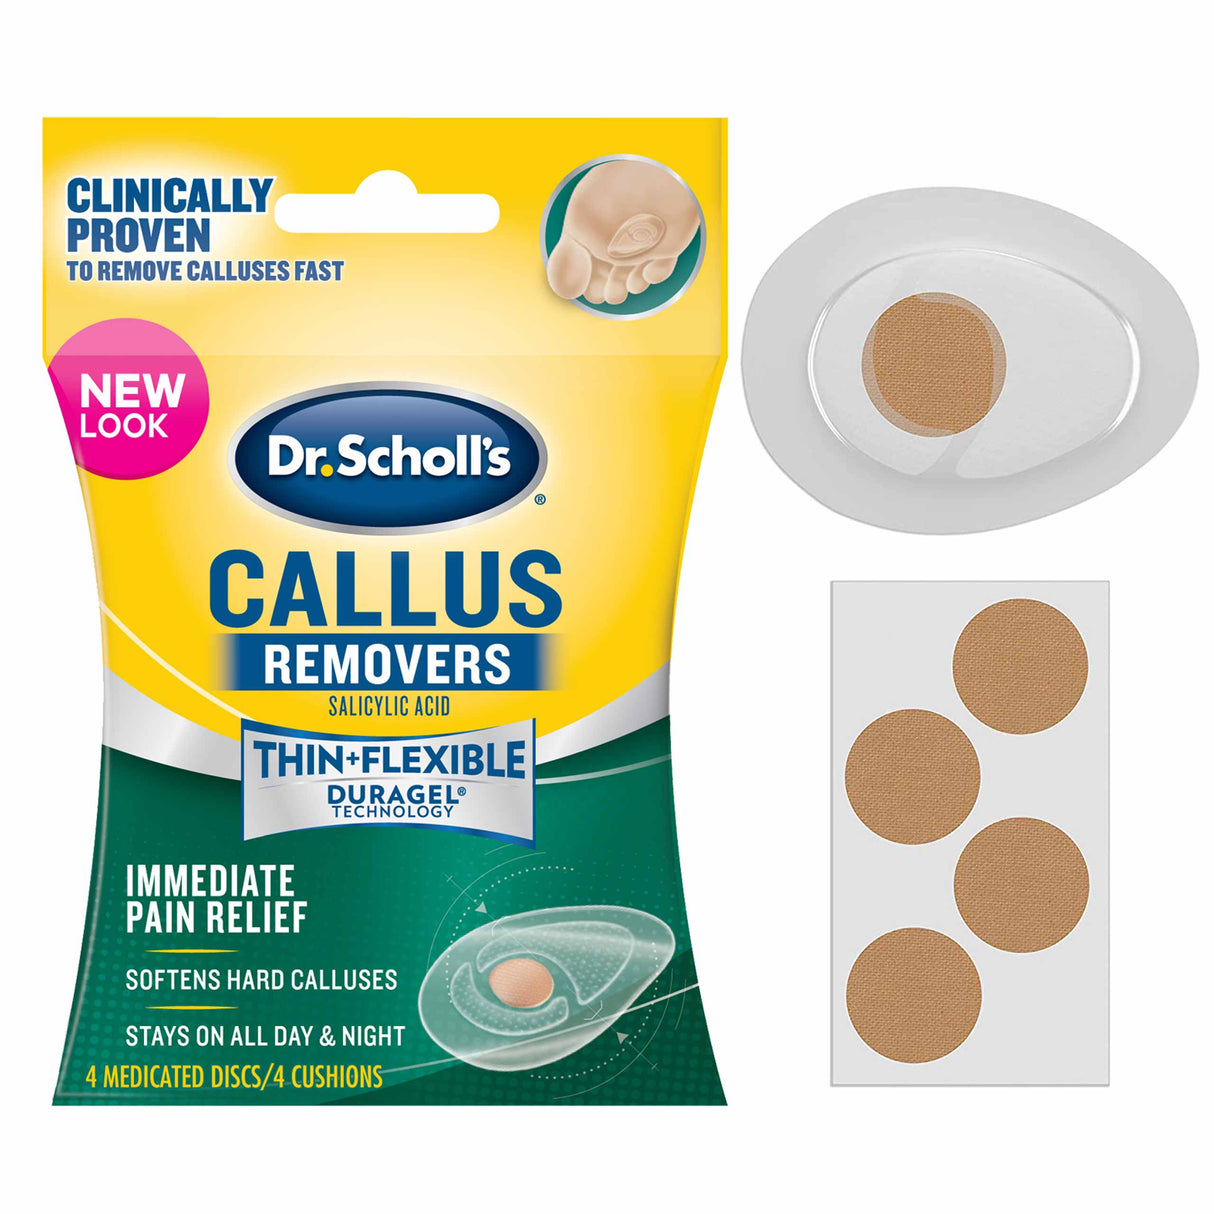 Callus Removers Seal & Heal Bandage with Hydrogel Technology